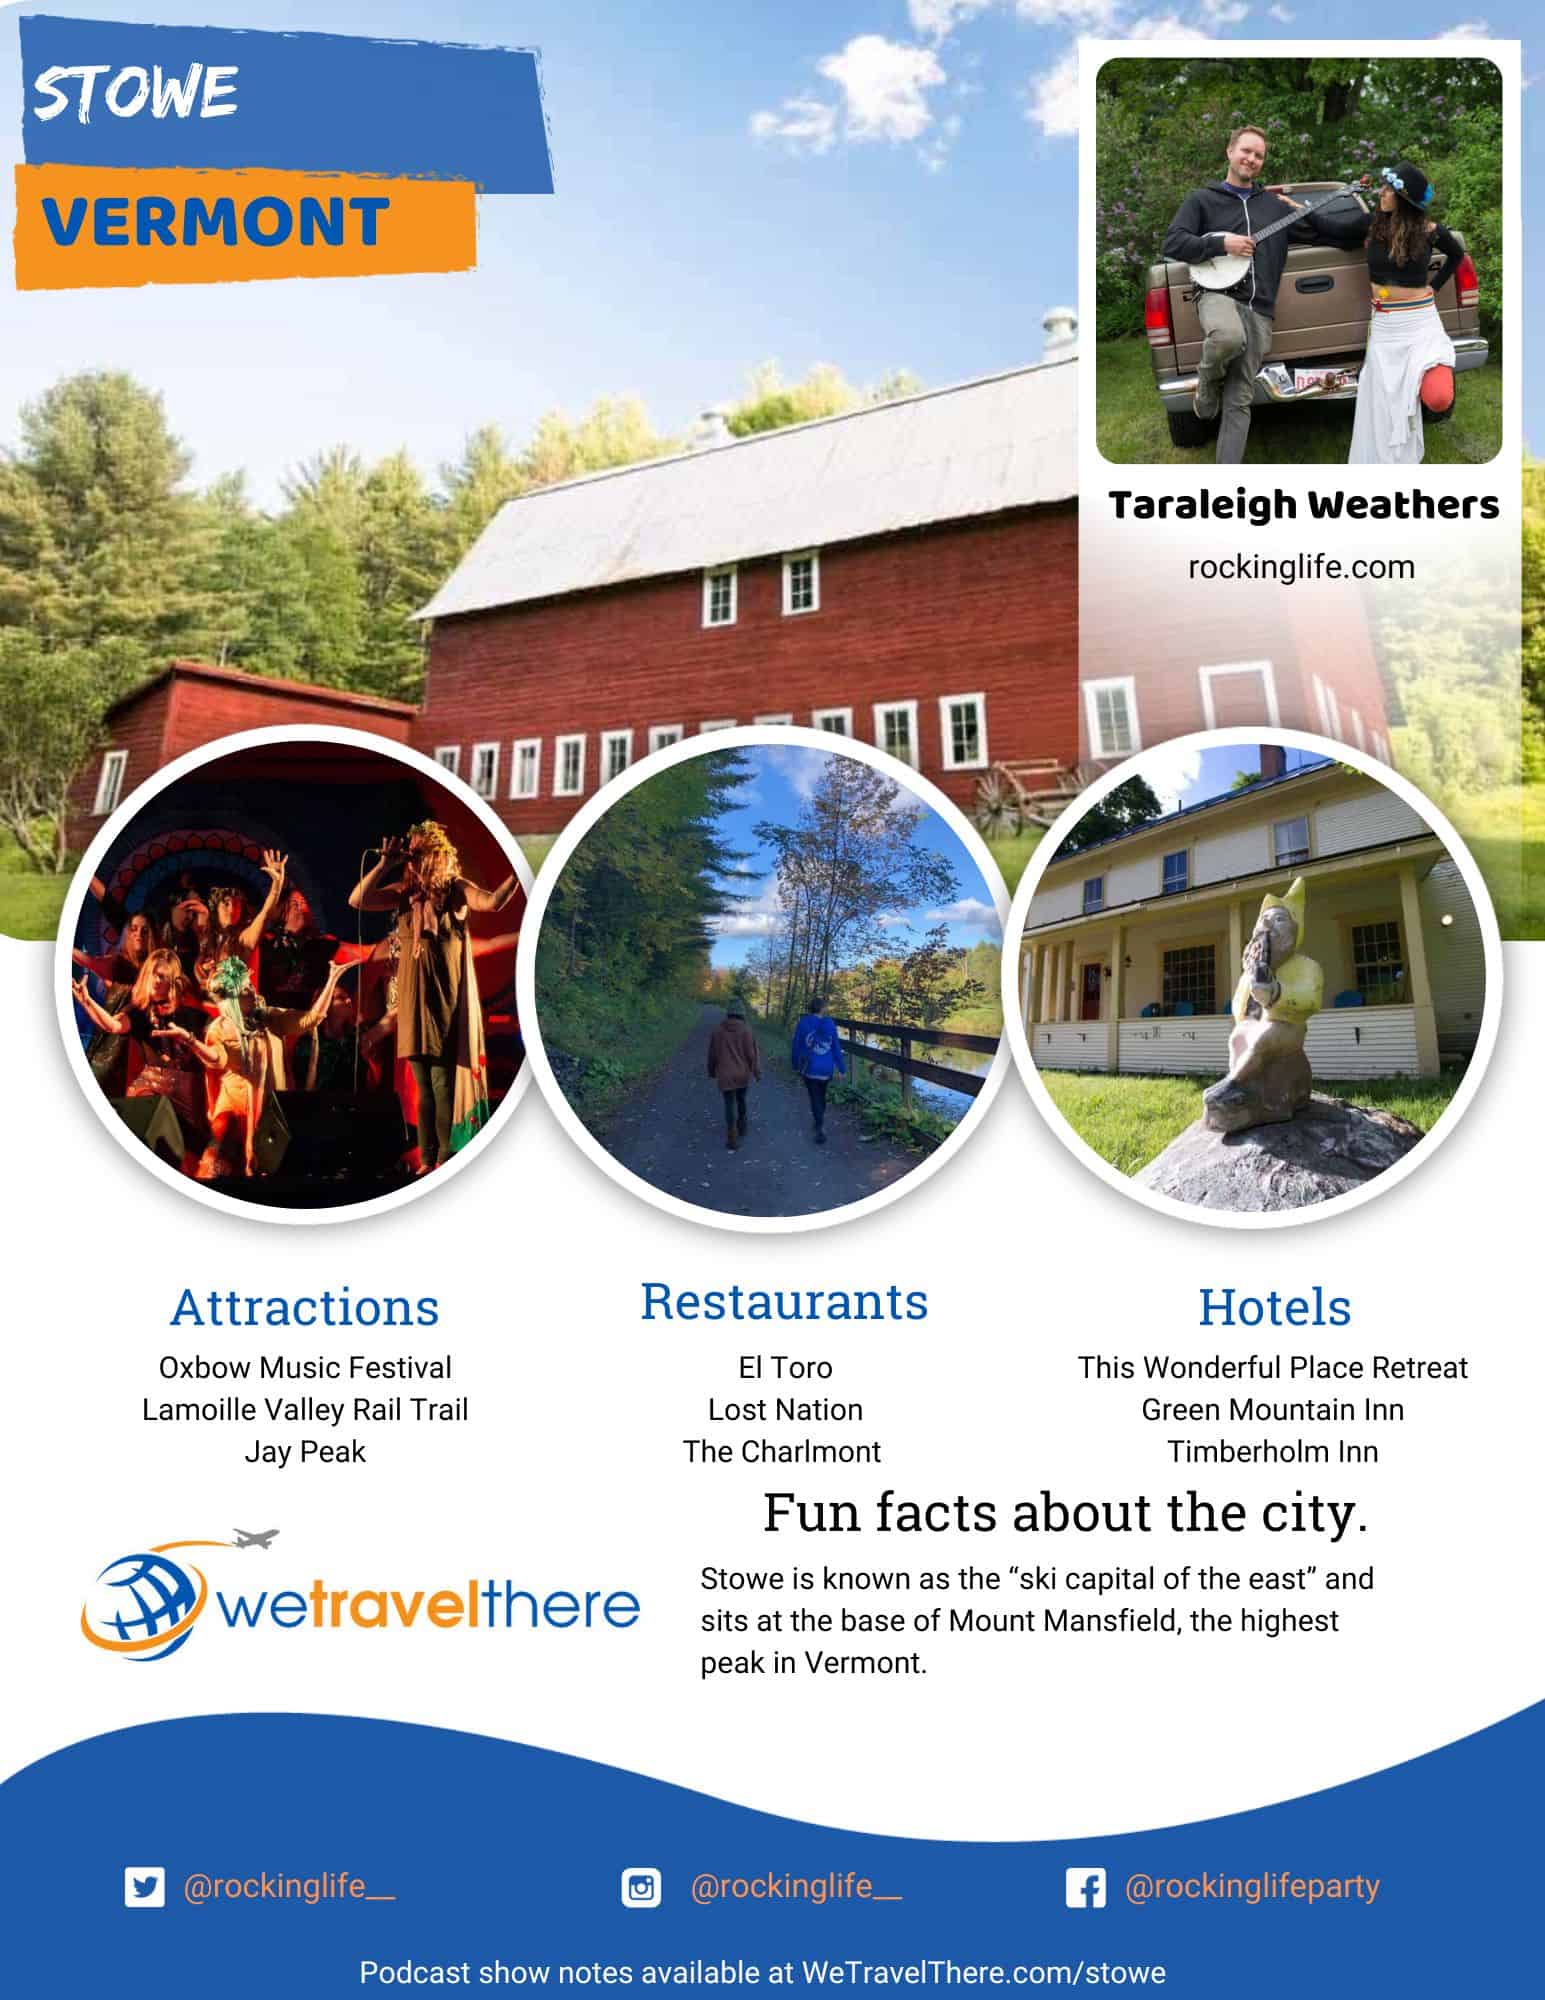 We-Travel-There-Stowe-Vermont-Taraleigh-Weathers-podcast-one-sheet